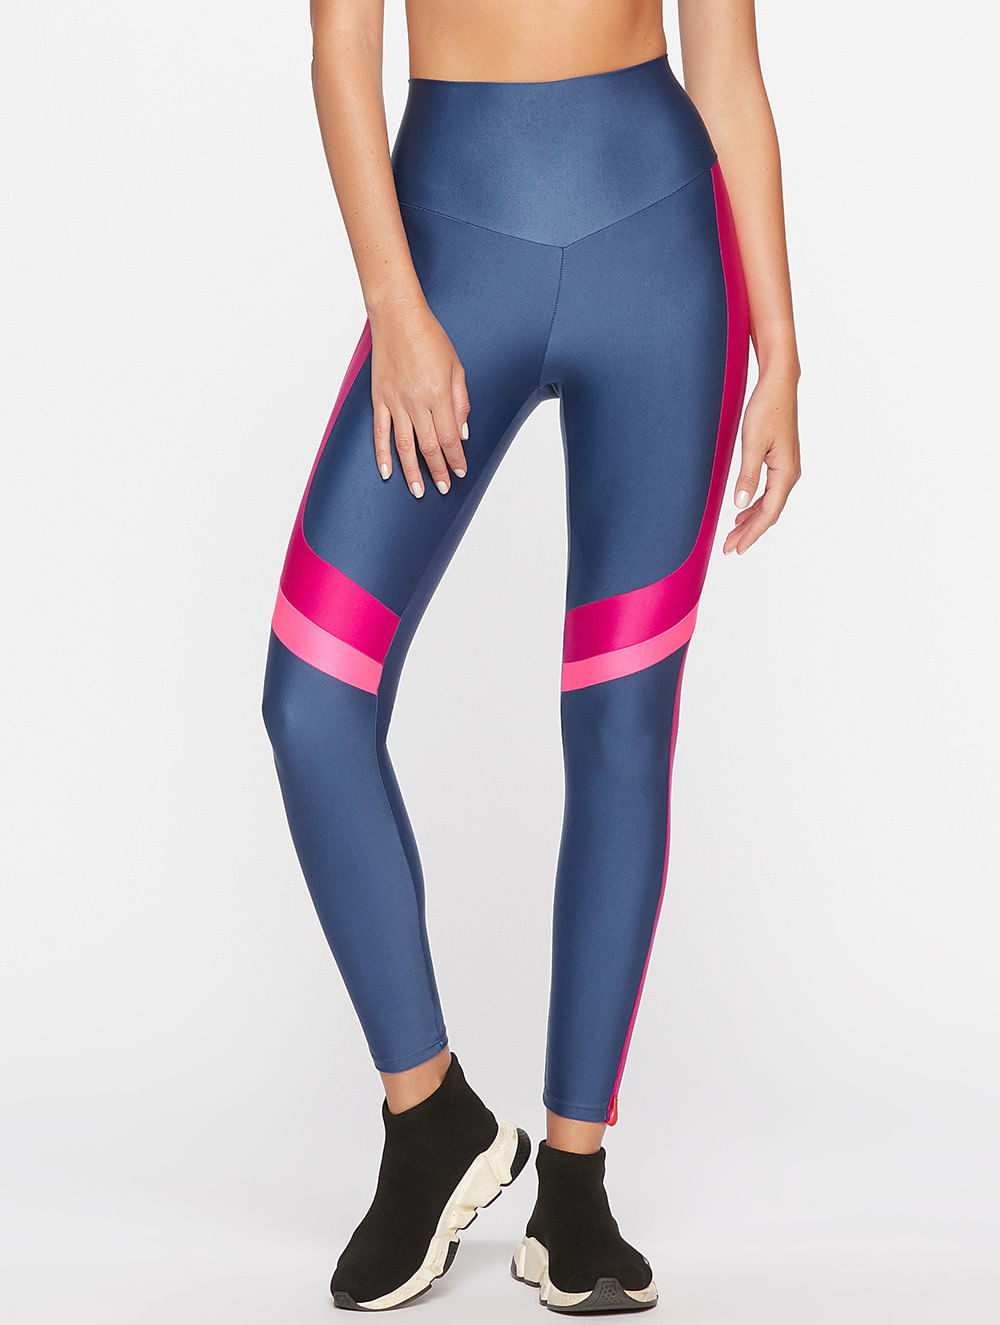 Leggings Air Body For Sure – Mineral Fashion Store